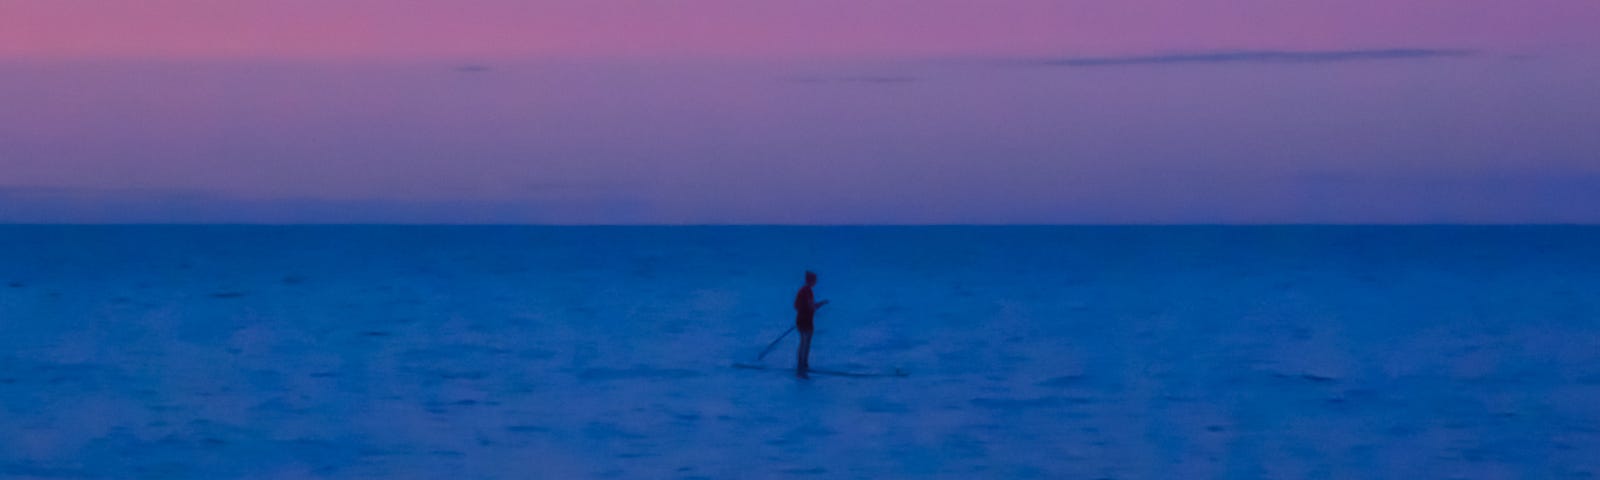 Float—a paddle boarder gliding across the lake at blue-pink sunset sky | nature photography | © pockett dessert